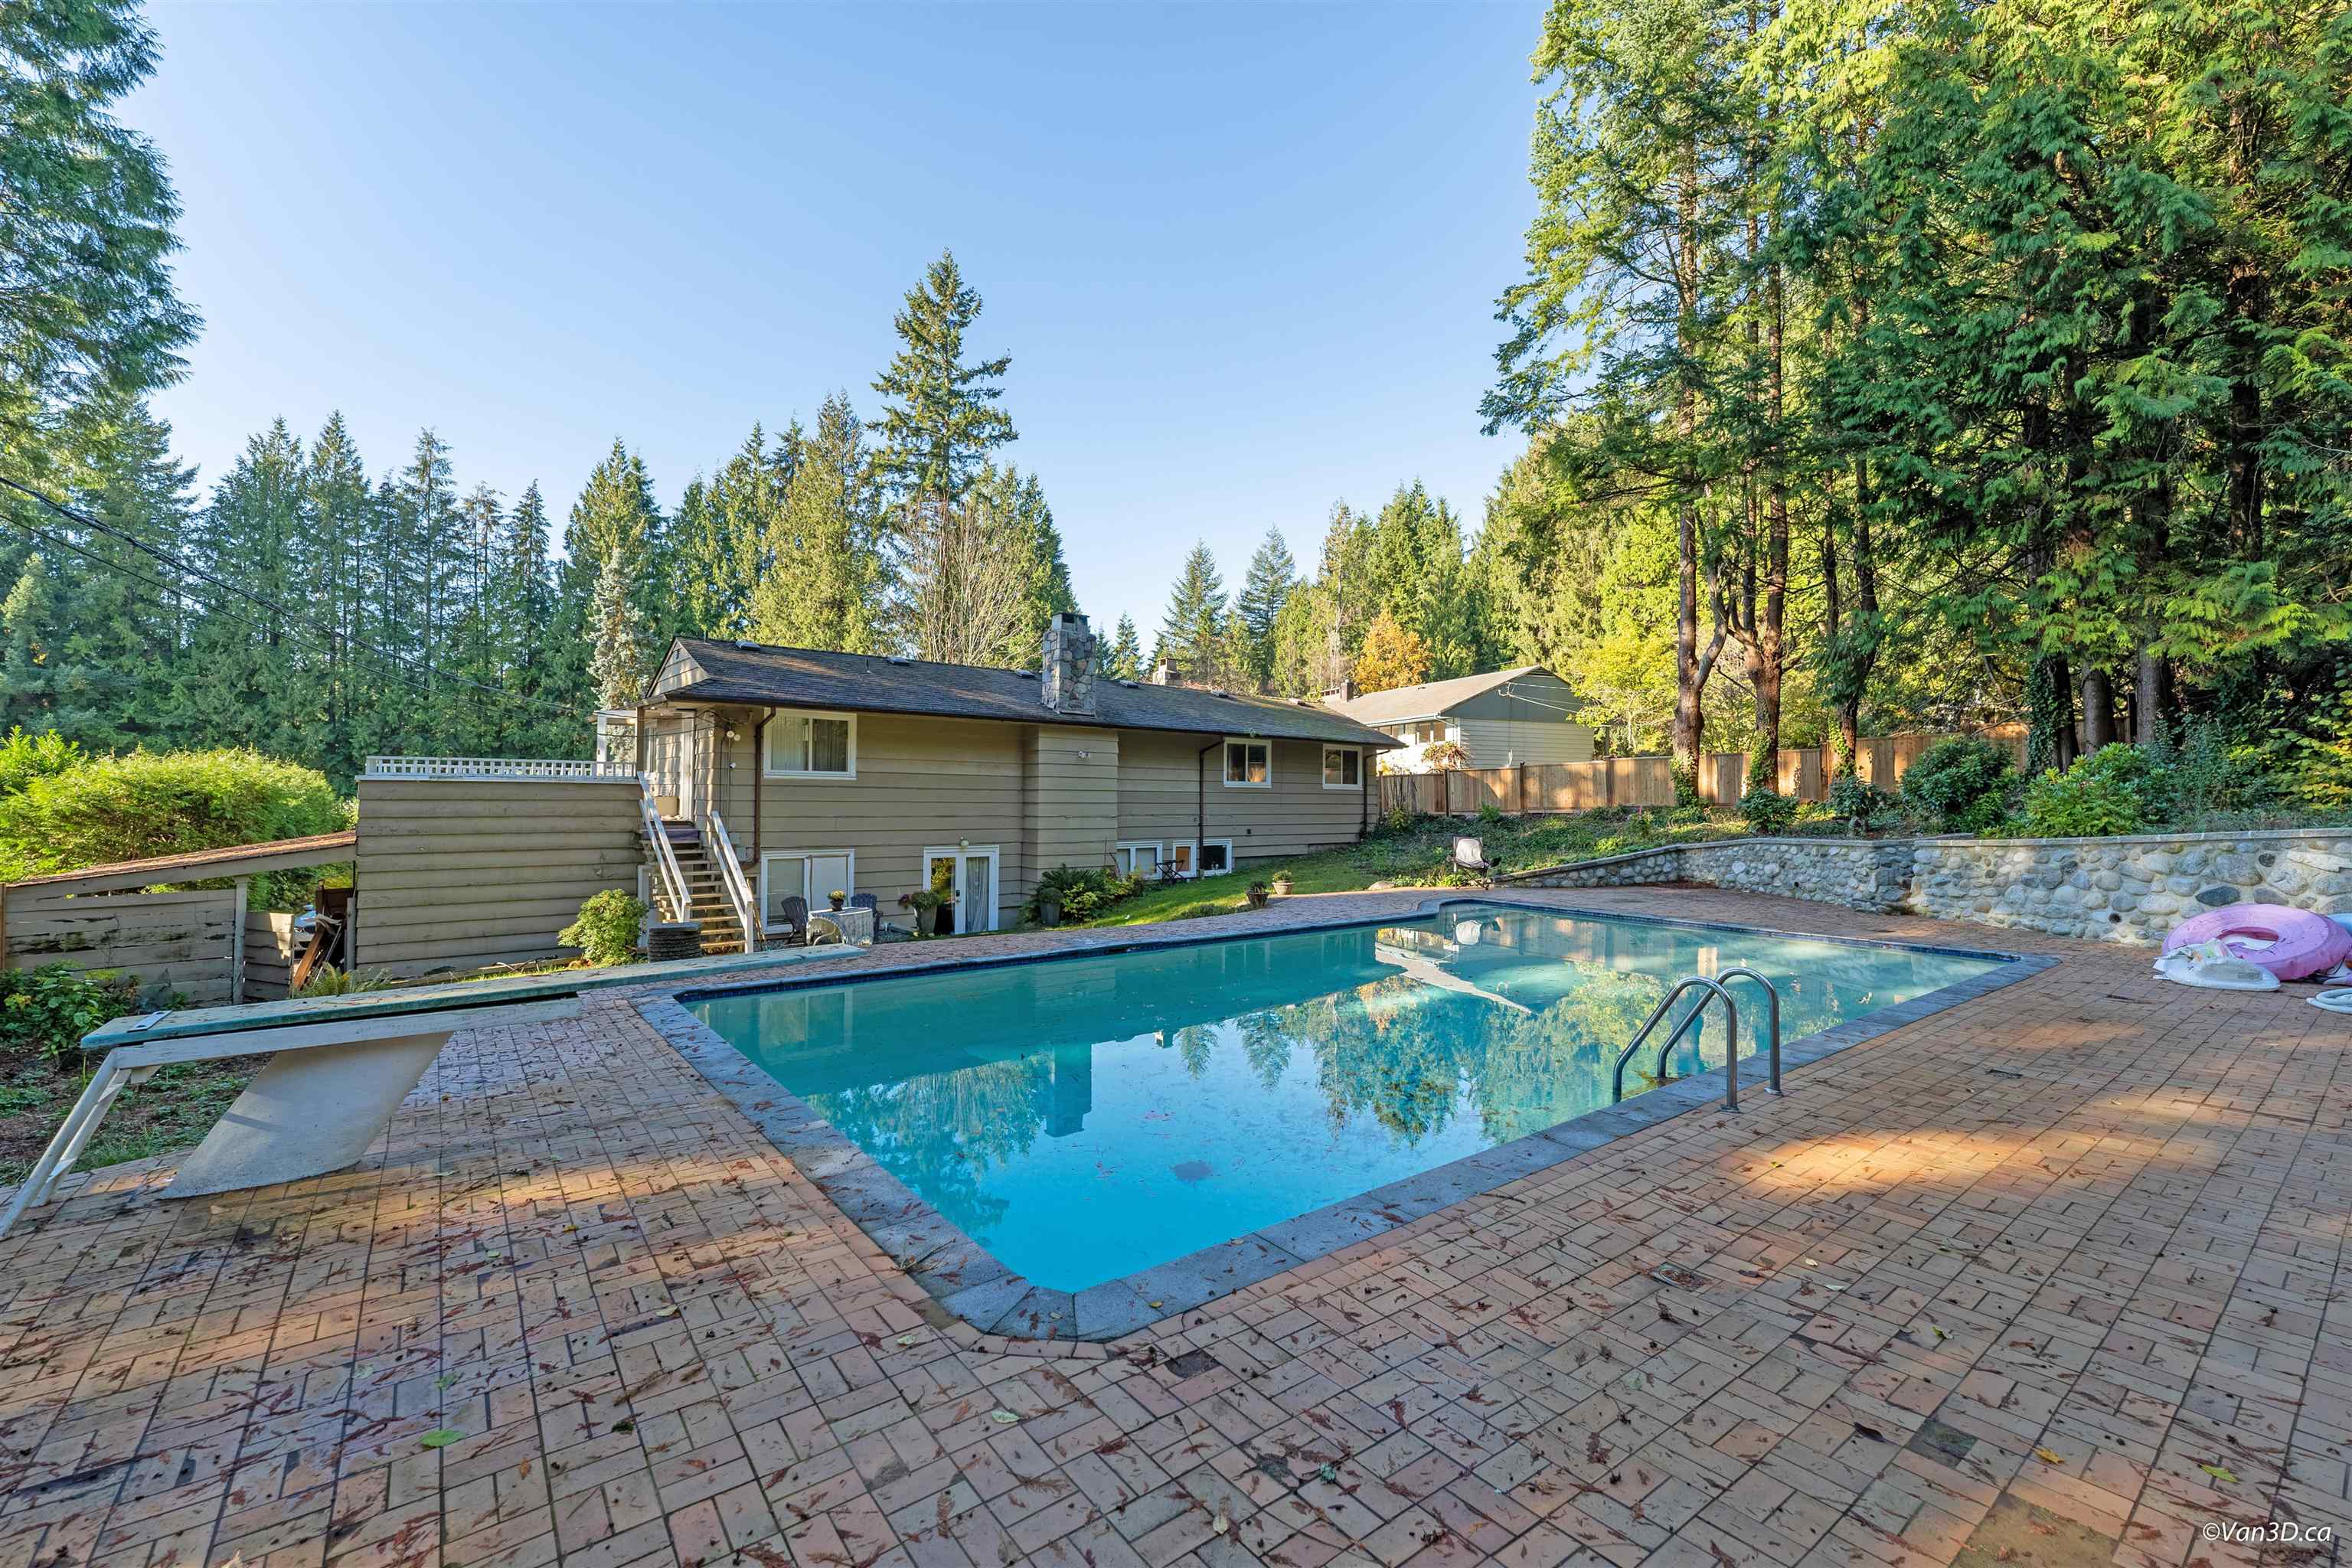 Listing image of 533 HADDEN DRIVE